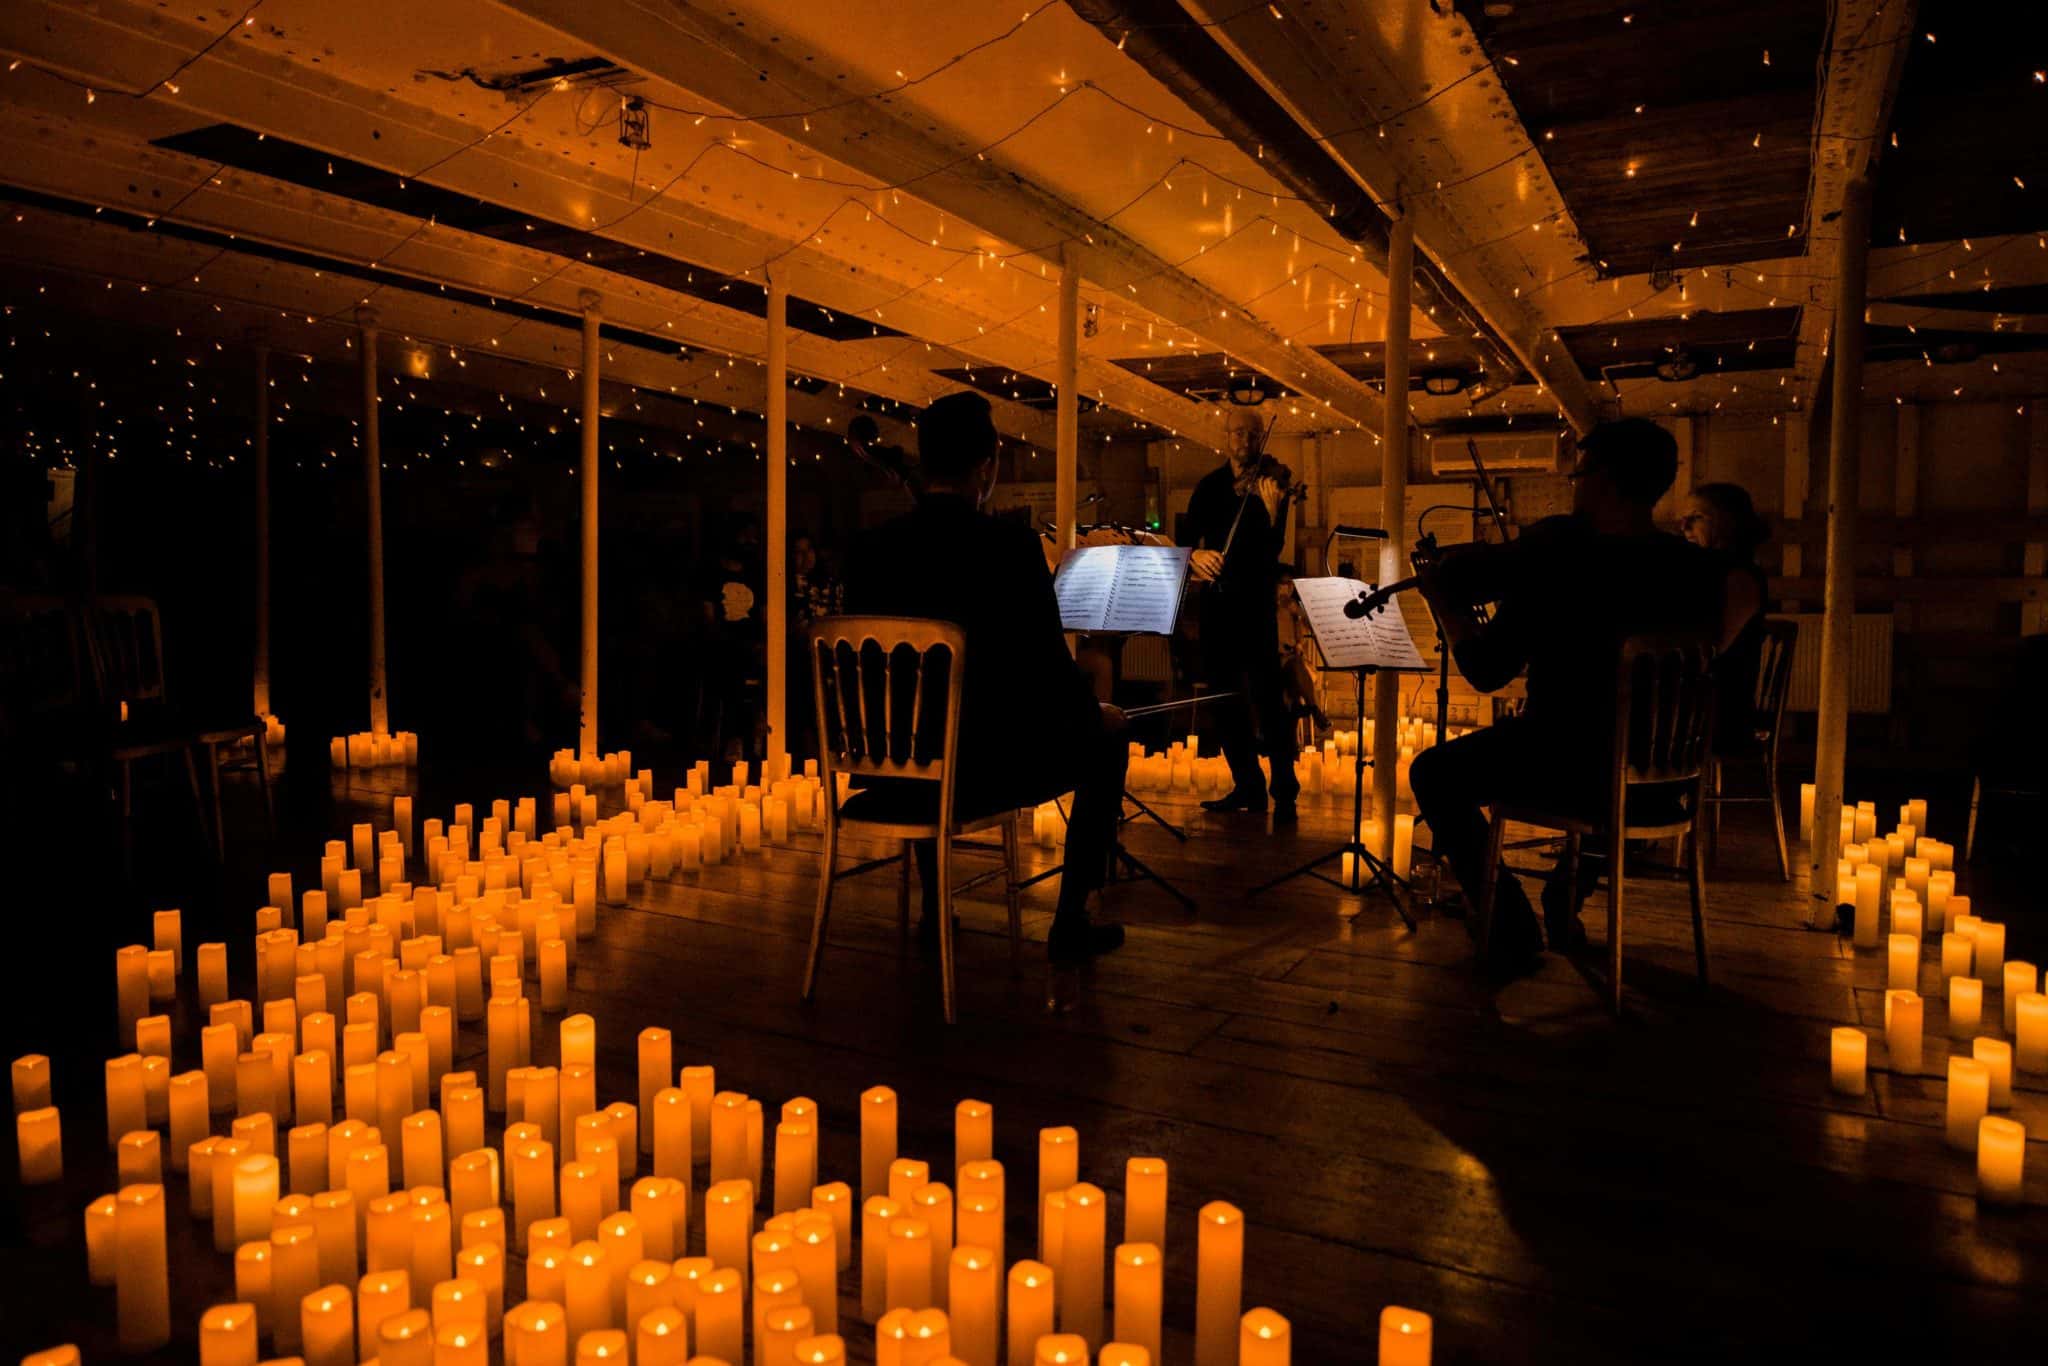 Candles covering the floor where a string quartet is performing.